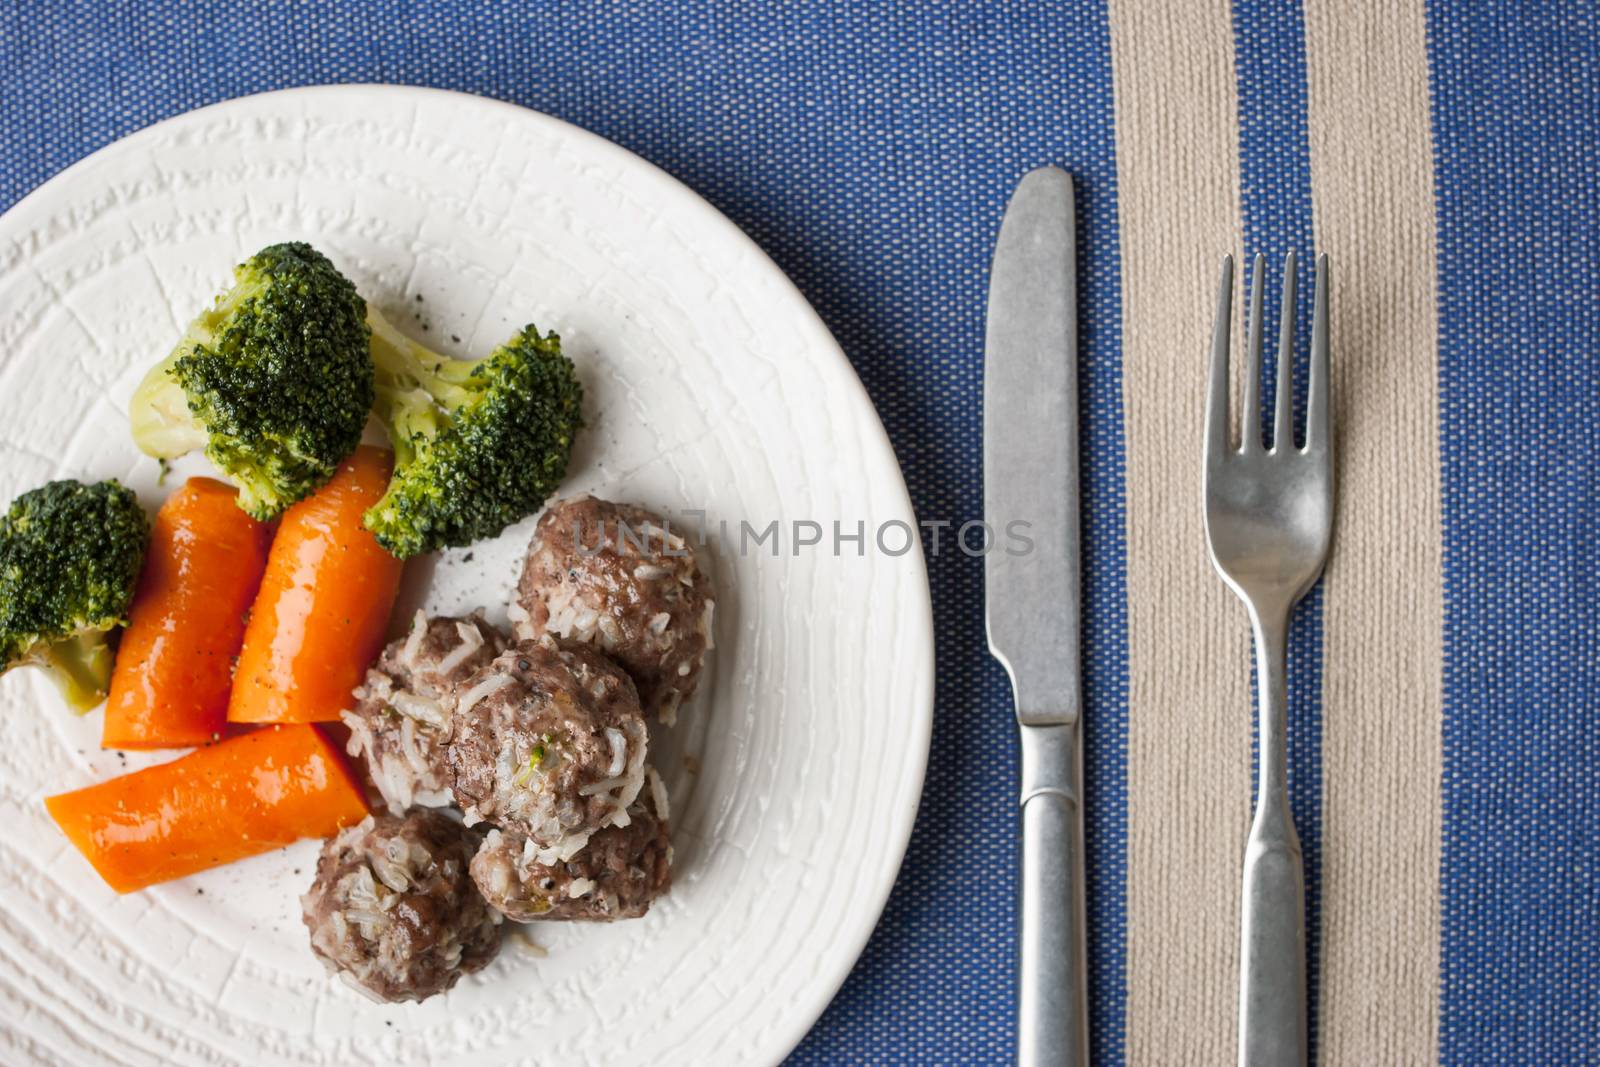 Broccoli , carrots and meatballs on the blue napkin with cutlery top view